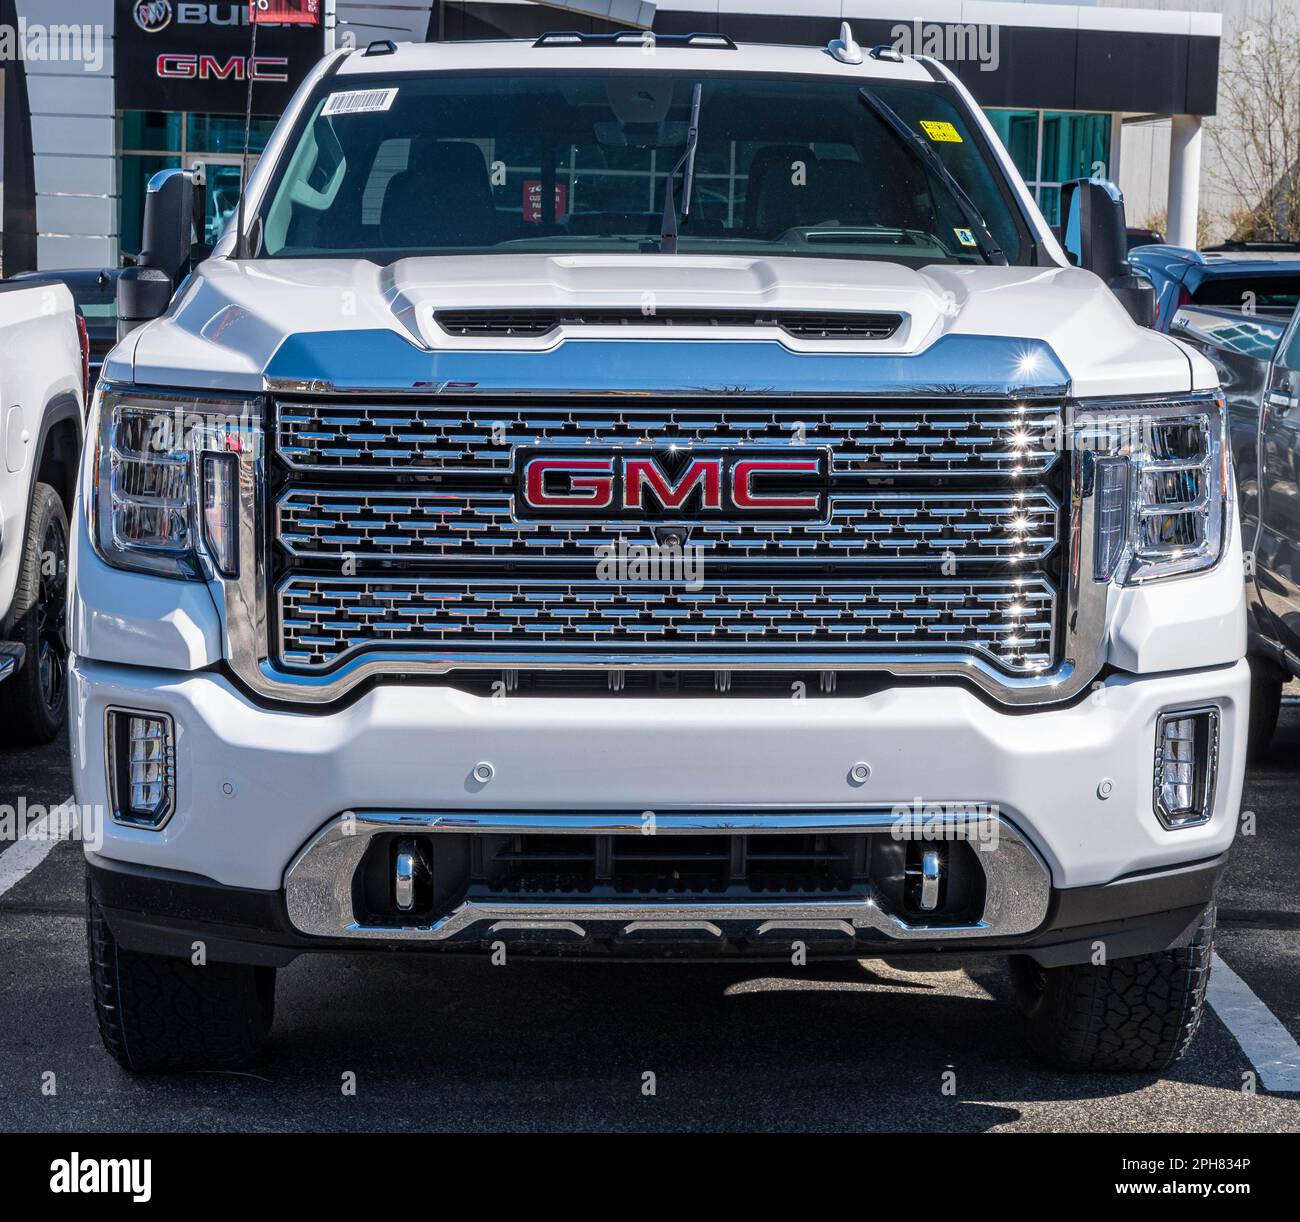 A new, white GMC pickup truck for sale at a dealership in Monroeville, Pennsylvania, USA Stock Photo